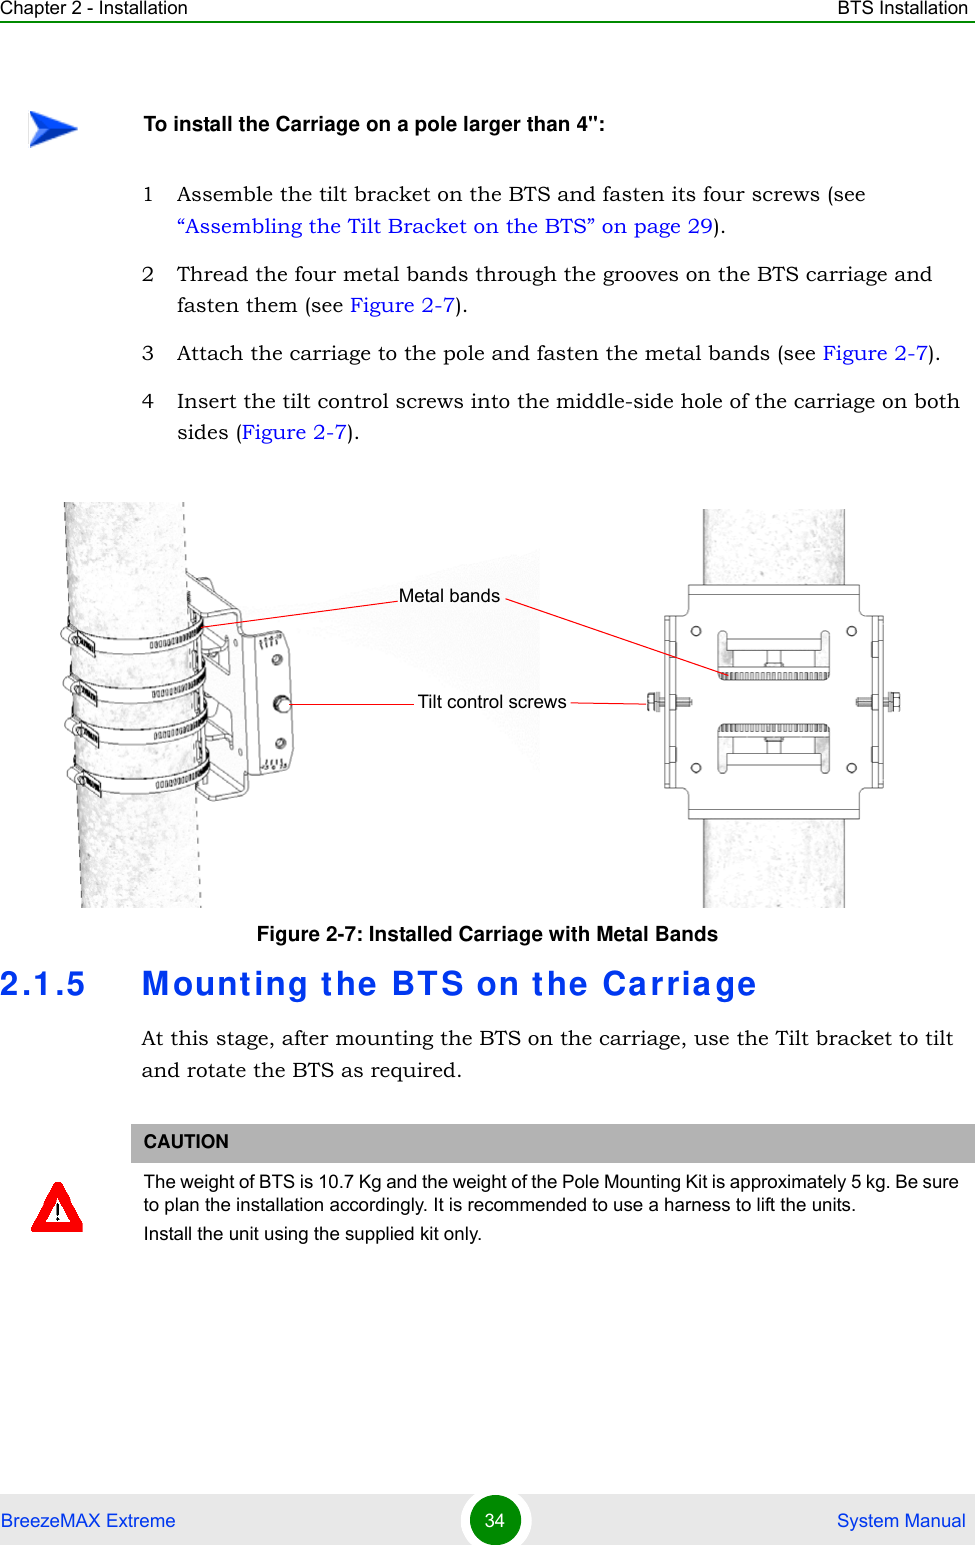 Chapter 2 - Installation BTS InstallationBreezeMAX Extreme 34  System Manual1 Assemble the tilt bracket on the BTS and fasten its four screws (see “Assembling the Tilt Bracket on the BTS” on page 29).2 Thread the four metal bands through the grooves on the BTS carriage and fasten them (see Figure 2-7).3 Attach the carriage to the pole and fasten the metal bands (see Figure 2-7).4 Insert the tilt control screws into the middle-side hole of the carriage on both sides (Figure 2-7).2.1.5 Mounting t he BT S on the  CarriageAt this stage, after mounting the BTS on the carriage, use the Tilt bracket to tilt and rotate the BTS as required.To install the Carriage on a pole larger than 4&apos;&apos;:Figure 2-7: Installed Carriage with Metal BandsCAUTIONThe weight of BTS is 10.7 Kg and the weight of the Pole Mounting Kit is approximately 5 kg. Be sure to plan the installation accordingly. It is recommended to use a harness to lift the units.Install the unit using the supplied kit only. Tilt control screwsMetal bands